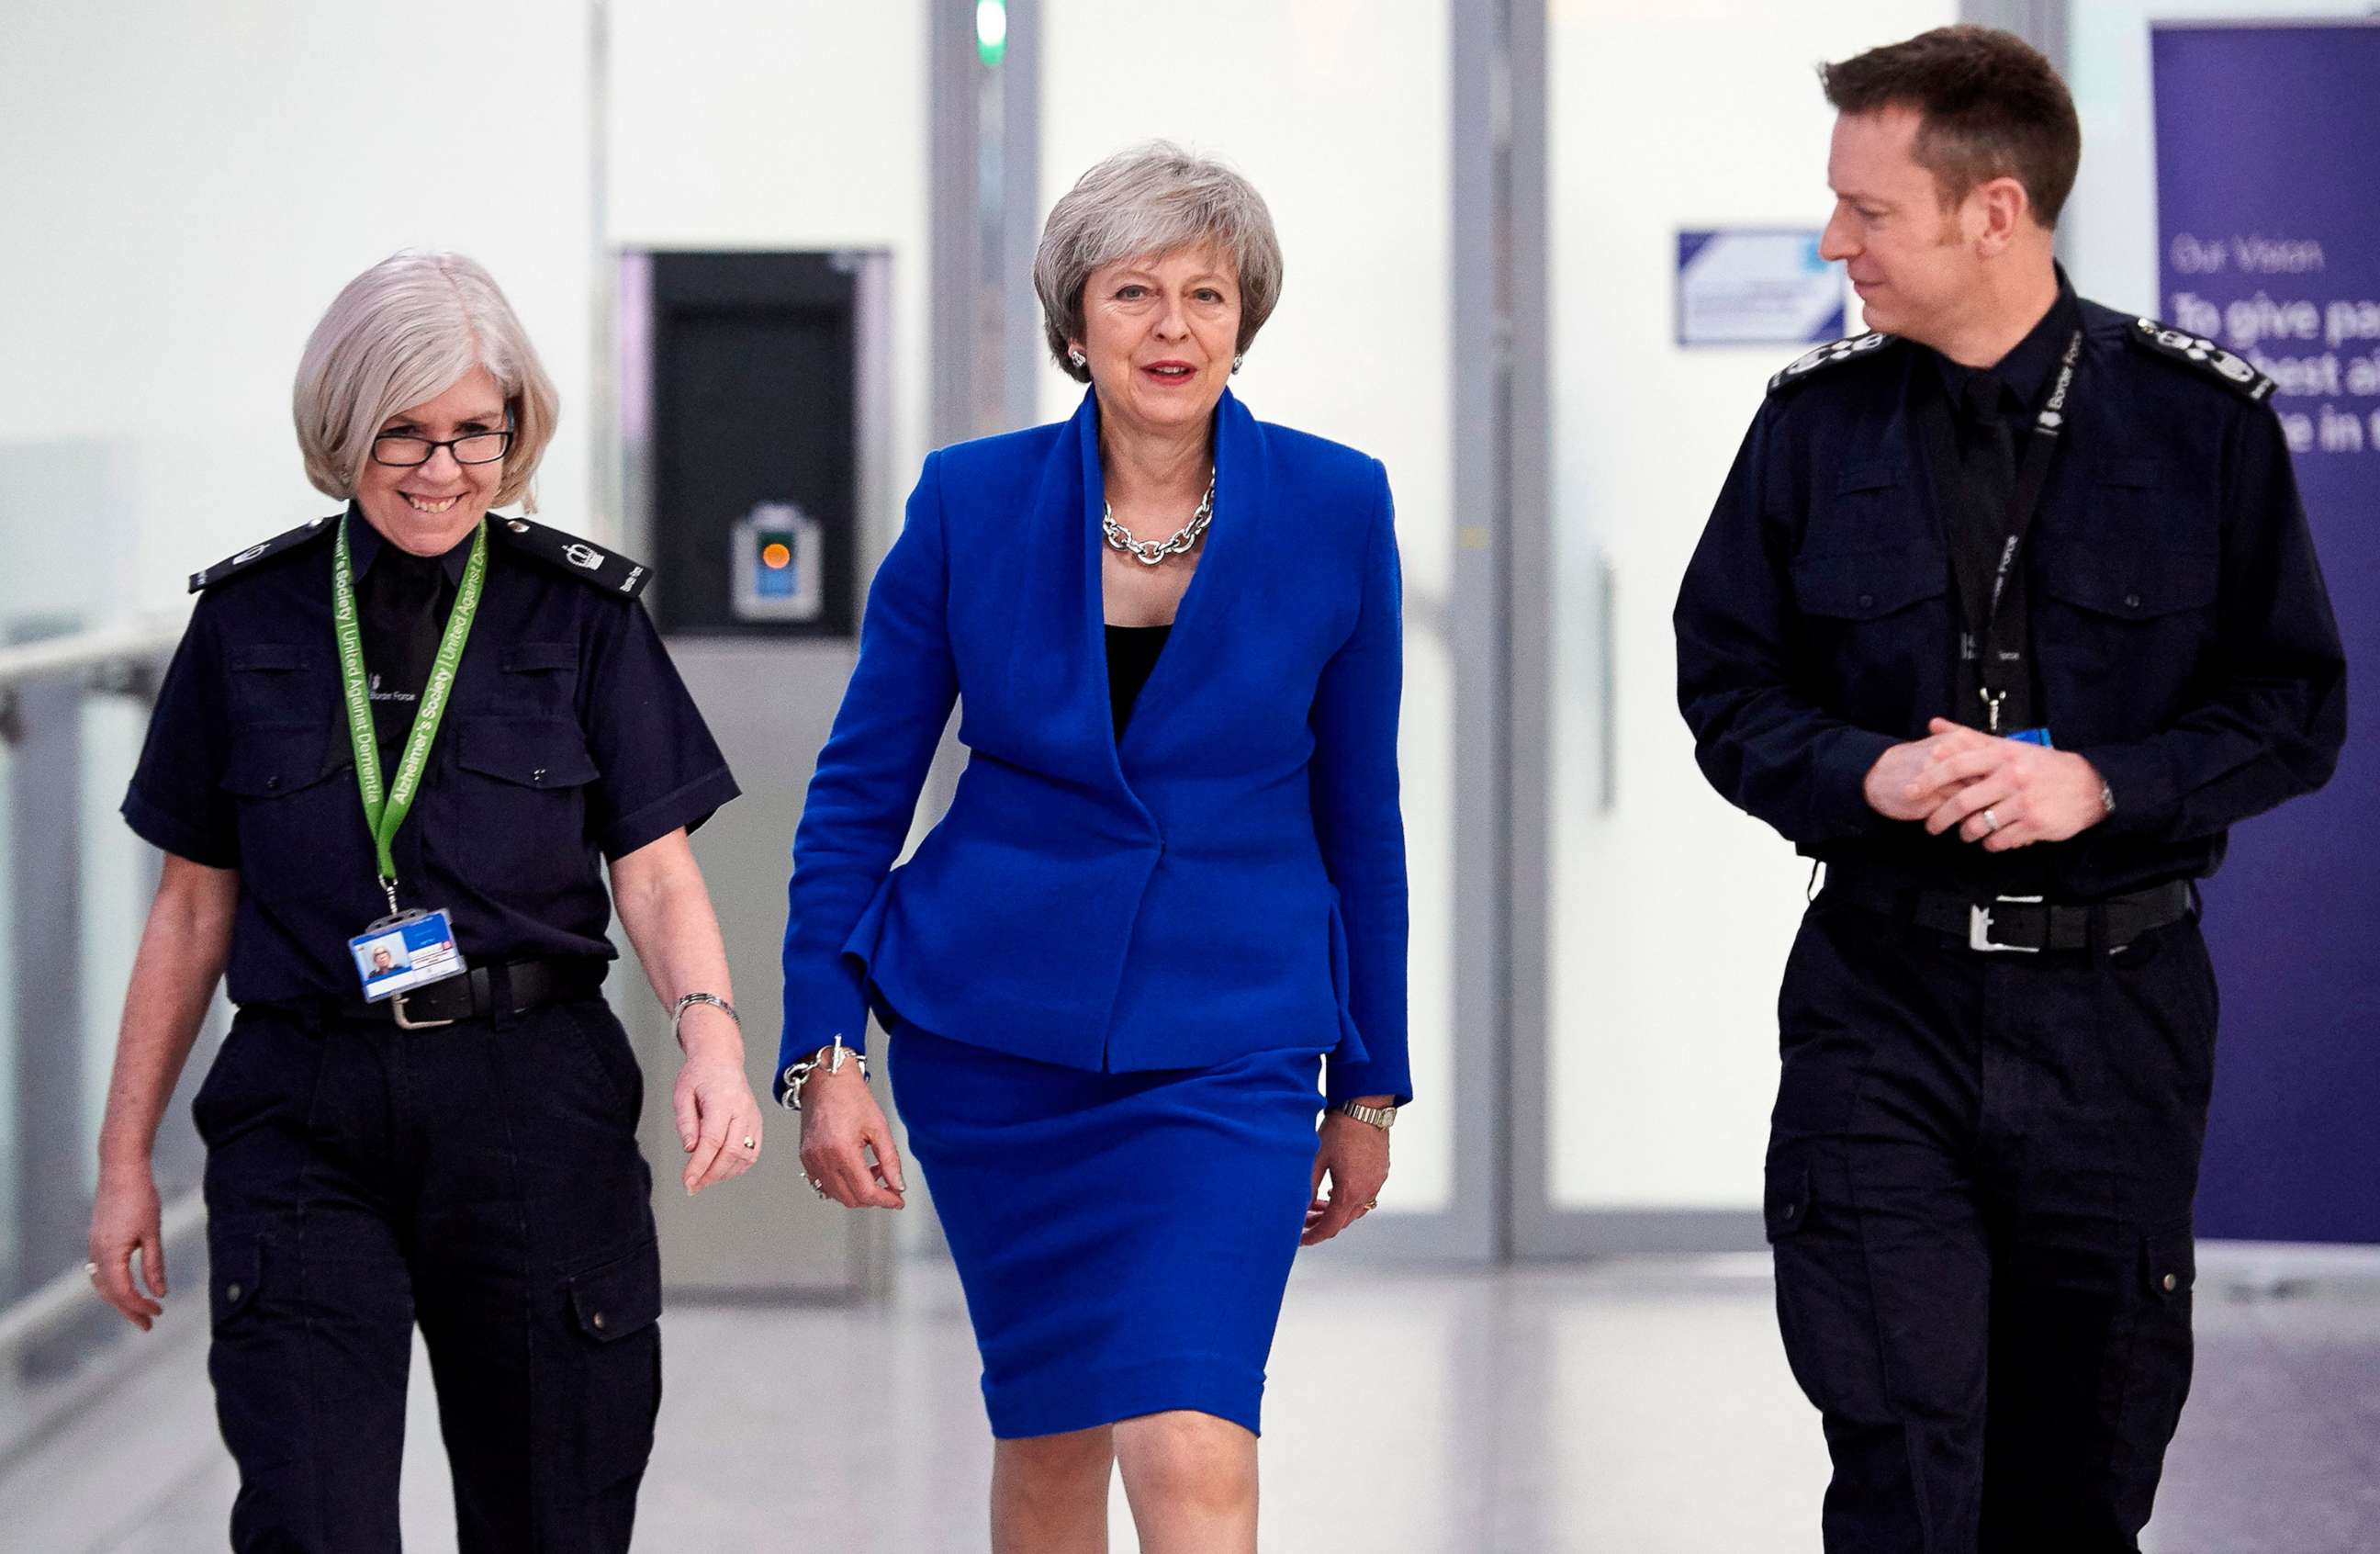 PHOTO: Britain's Prime Minister Theresa May talks with UK Border Force officers as she visits their Command Centre during her visit to Terminal 5 at London Heathrow Airport in west London on Dec. 19, 2018.